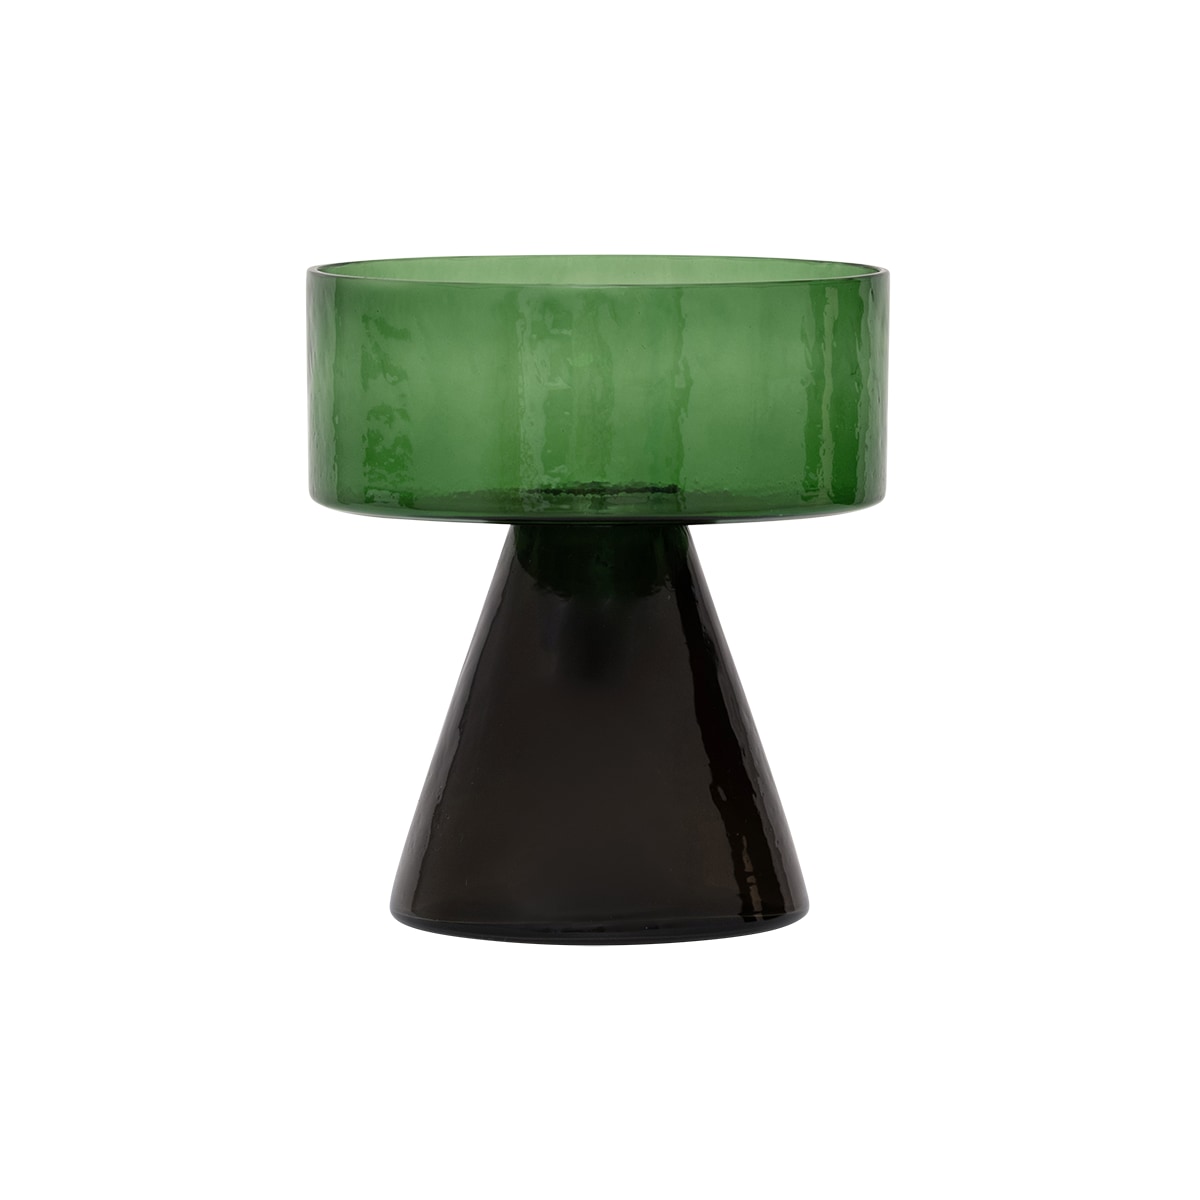 Cody - Recycled glass candleholder